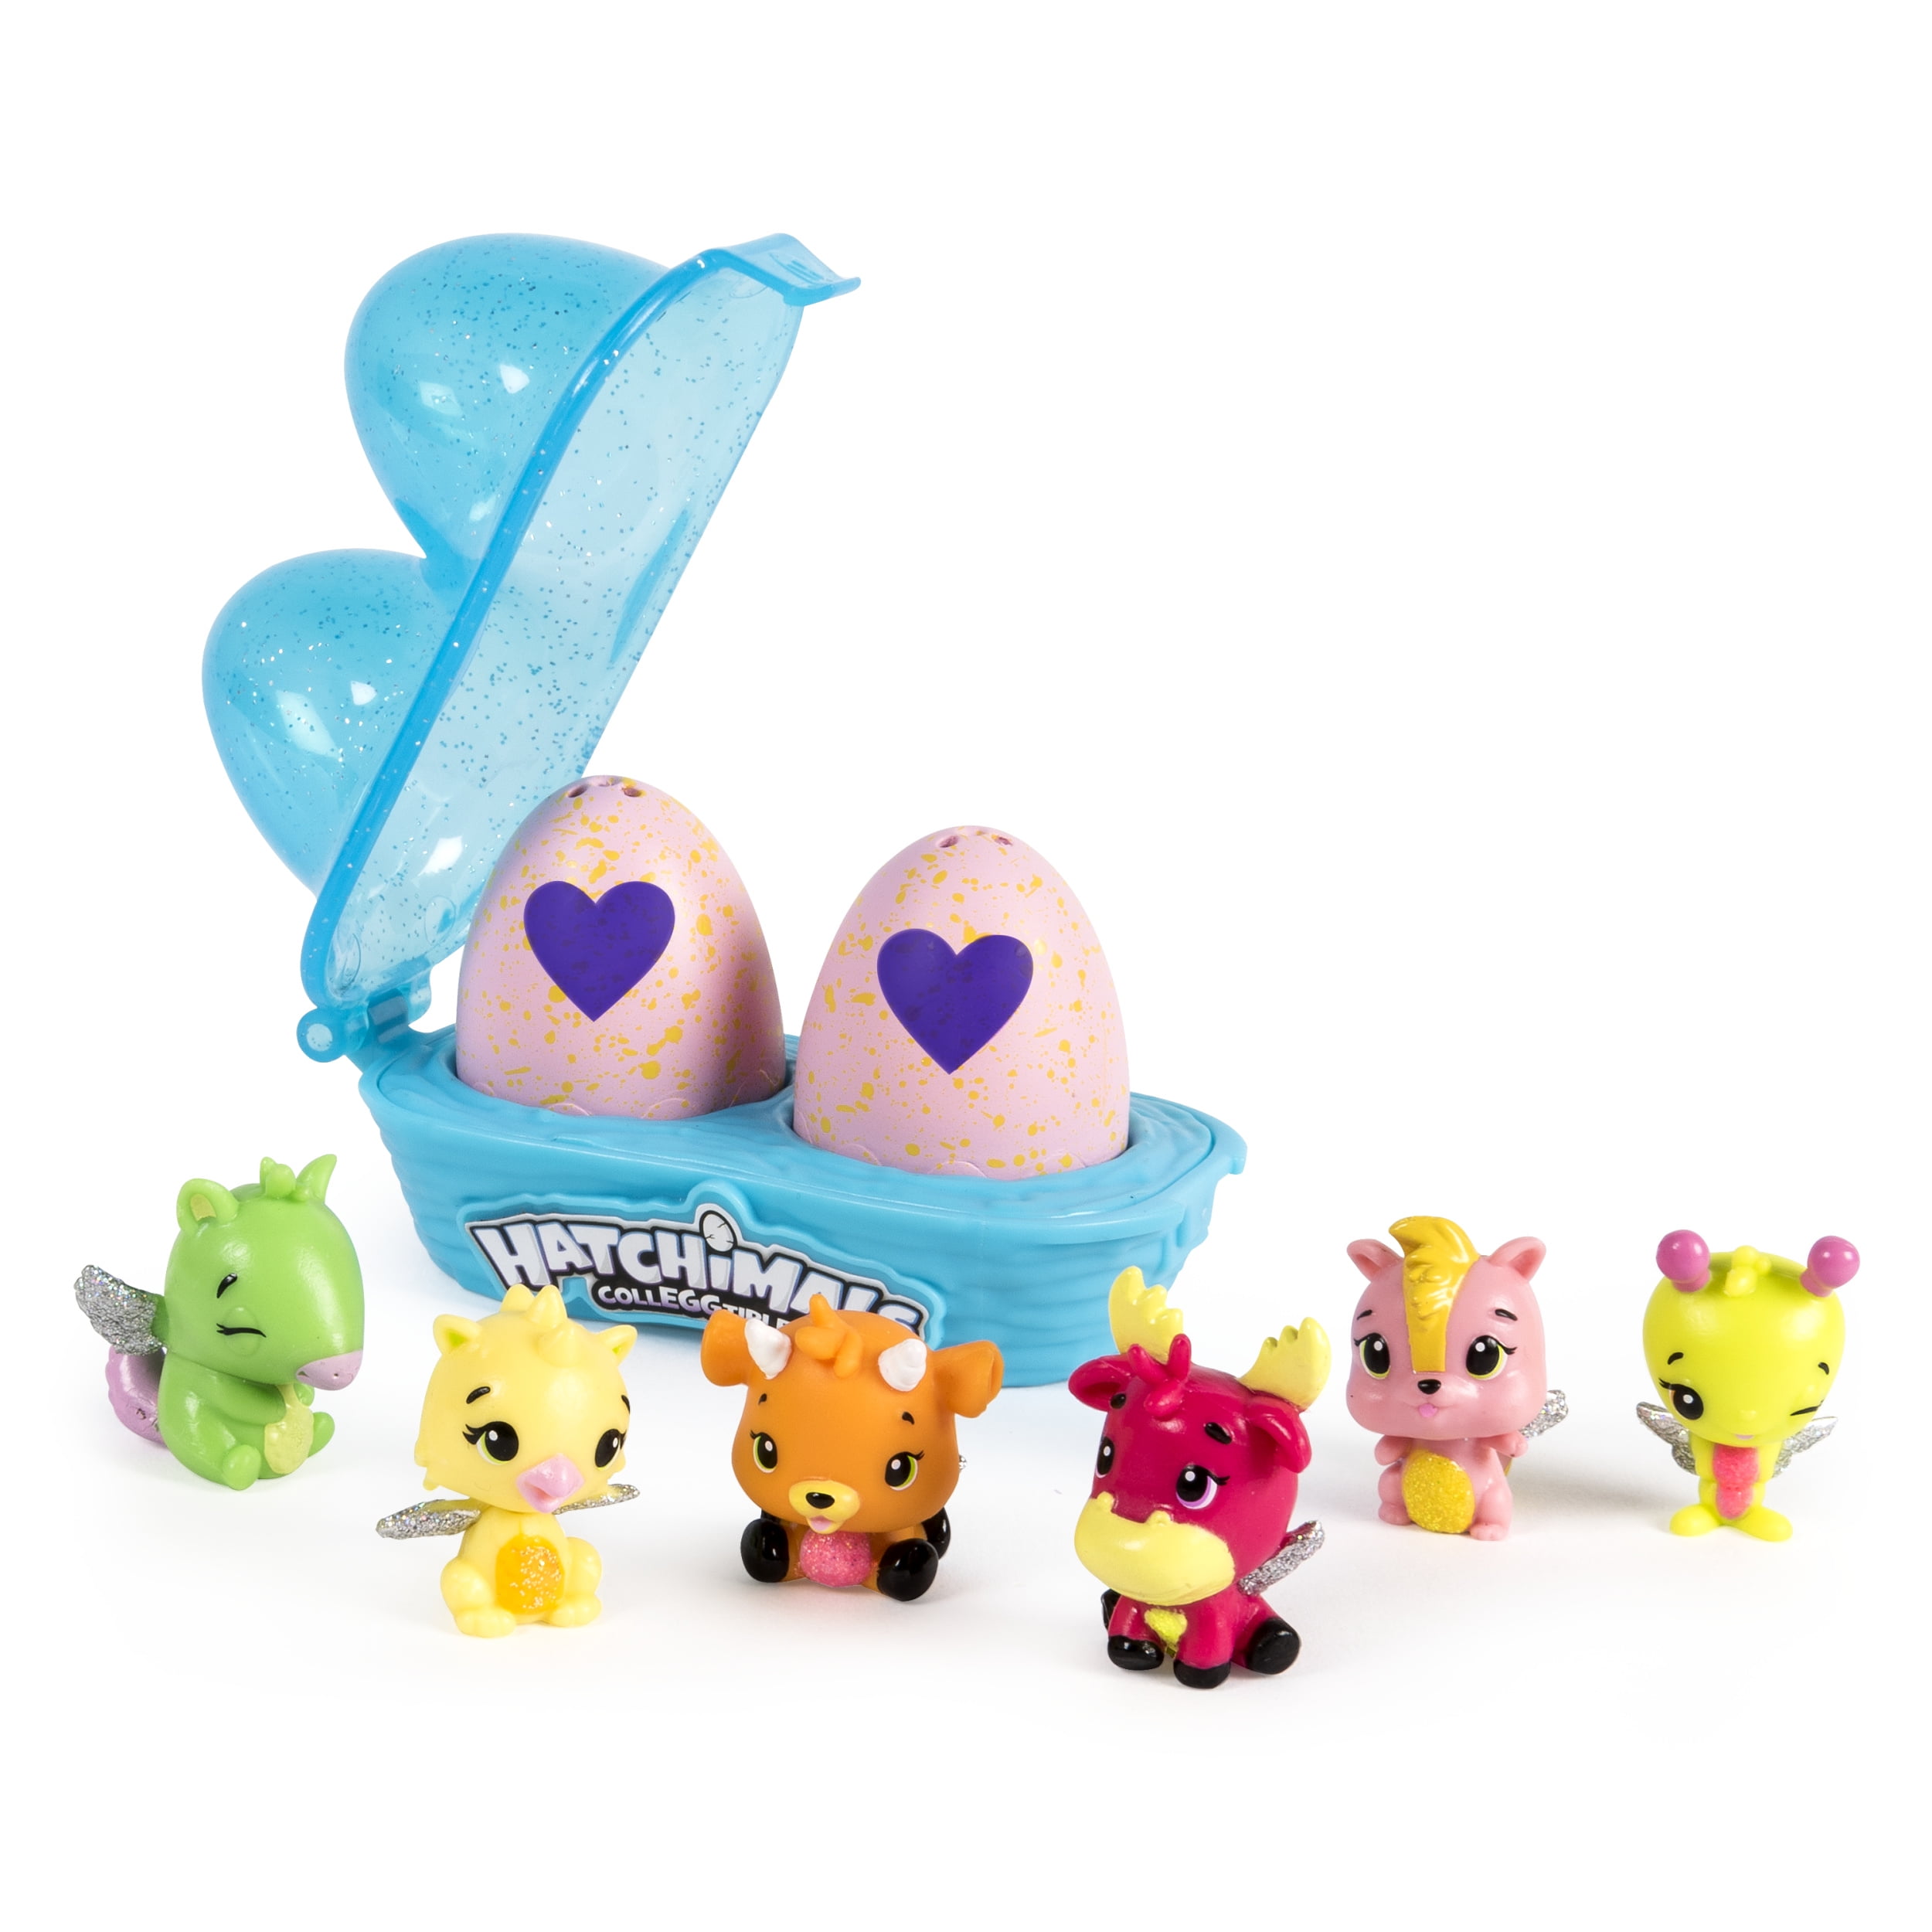 Details about   Hatchimals Colleggtibles Season 2 RIVER FAMILY HIPHATCH 